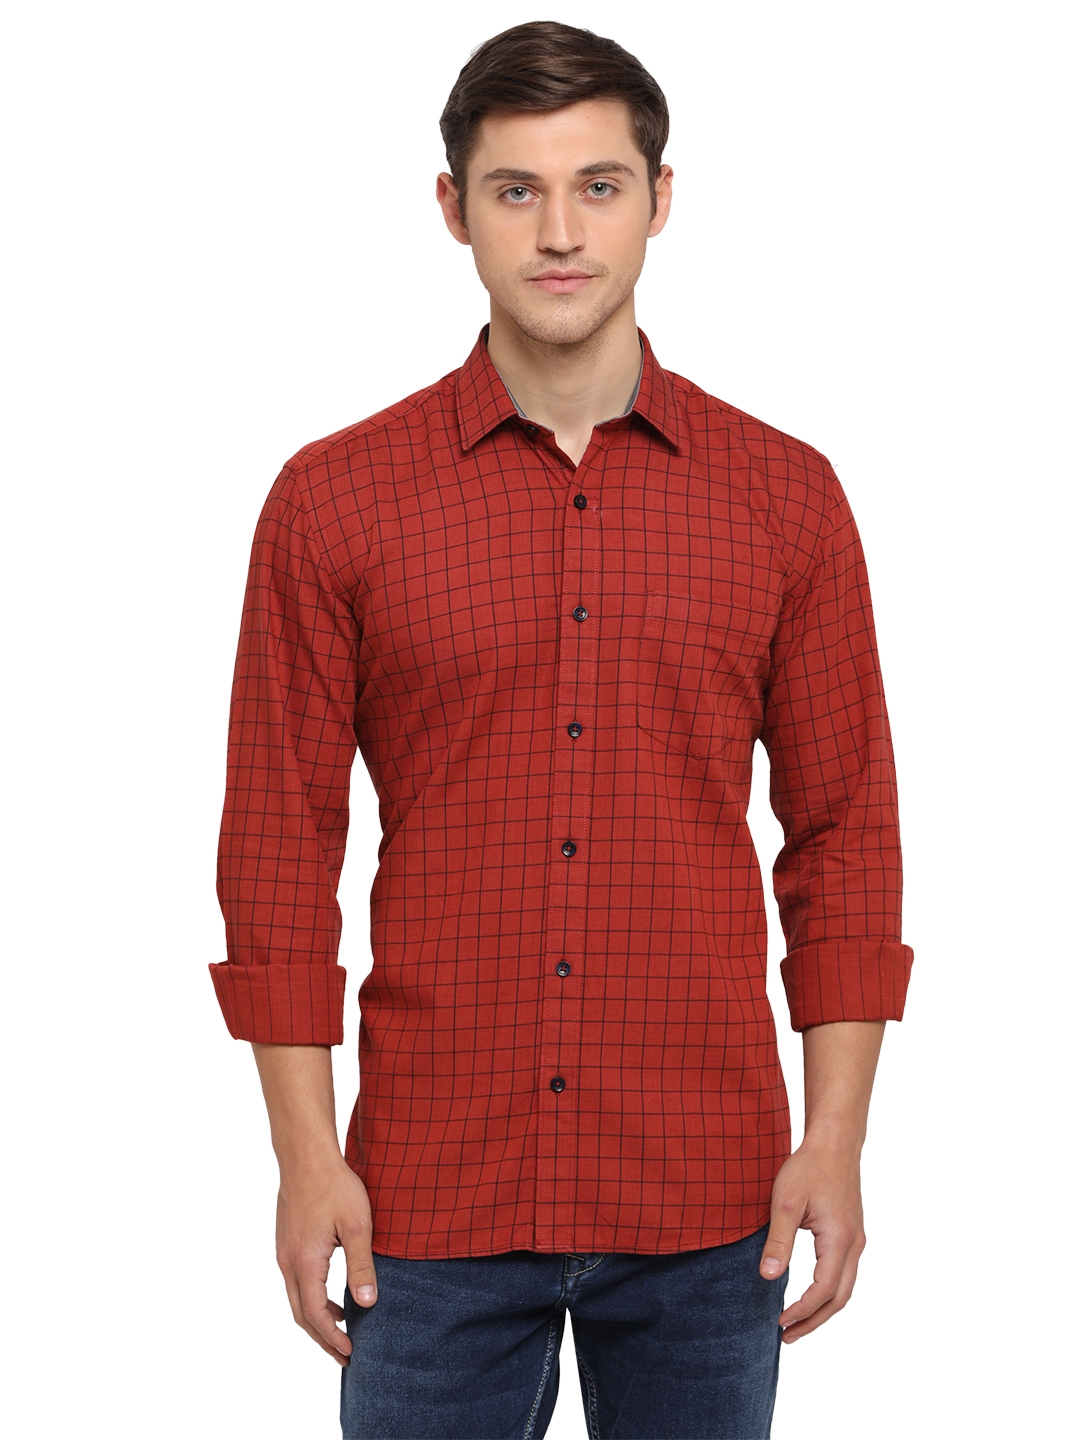 Greenfibre | Red Checked Smart Fit Semi Casual Shirt | Greenfibre